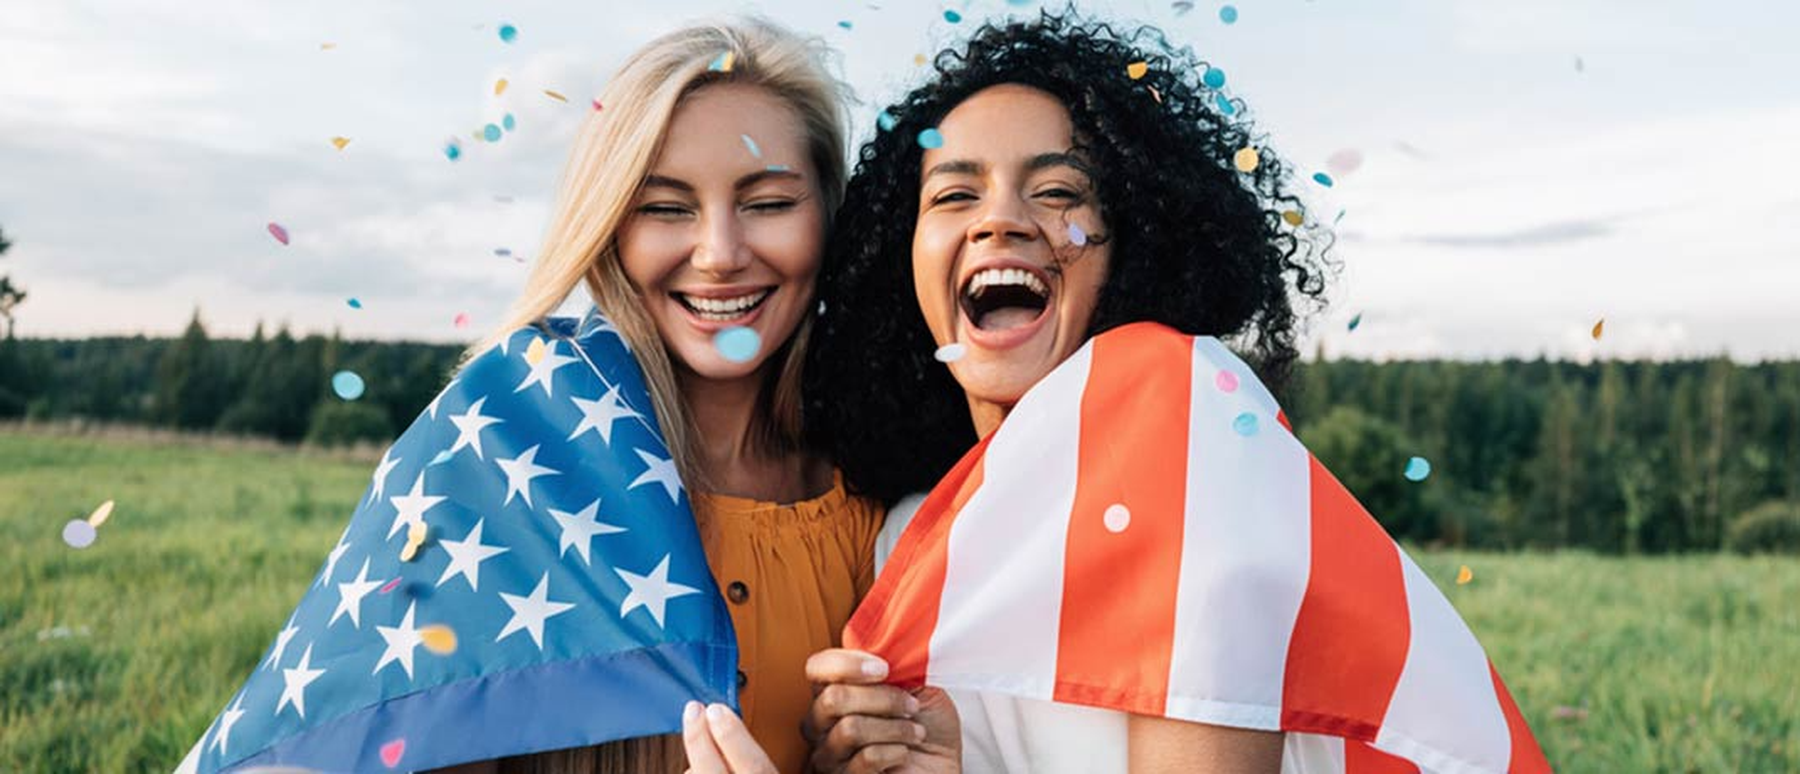 Young smiling women wrapped in an American flag throwing confetti